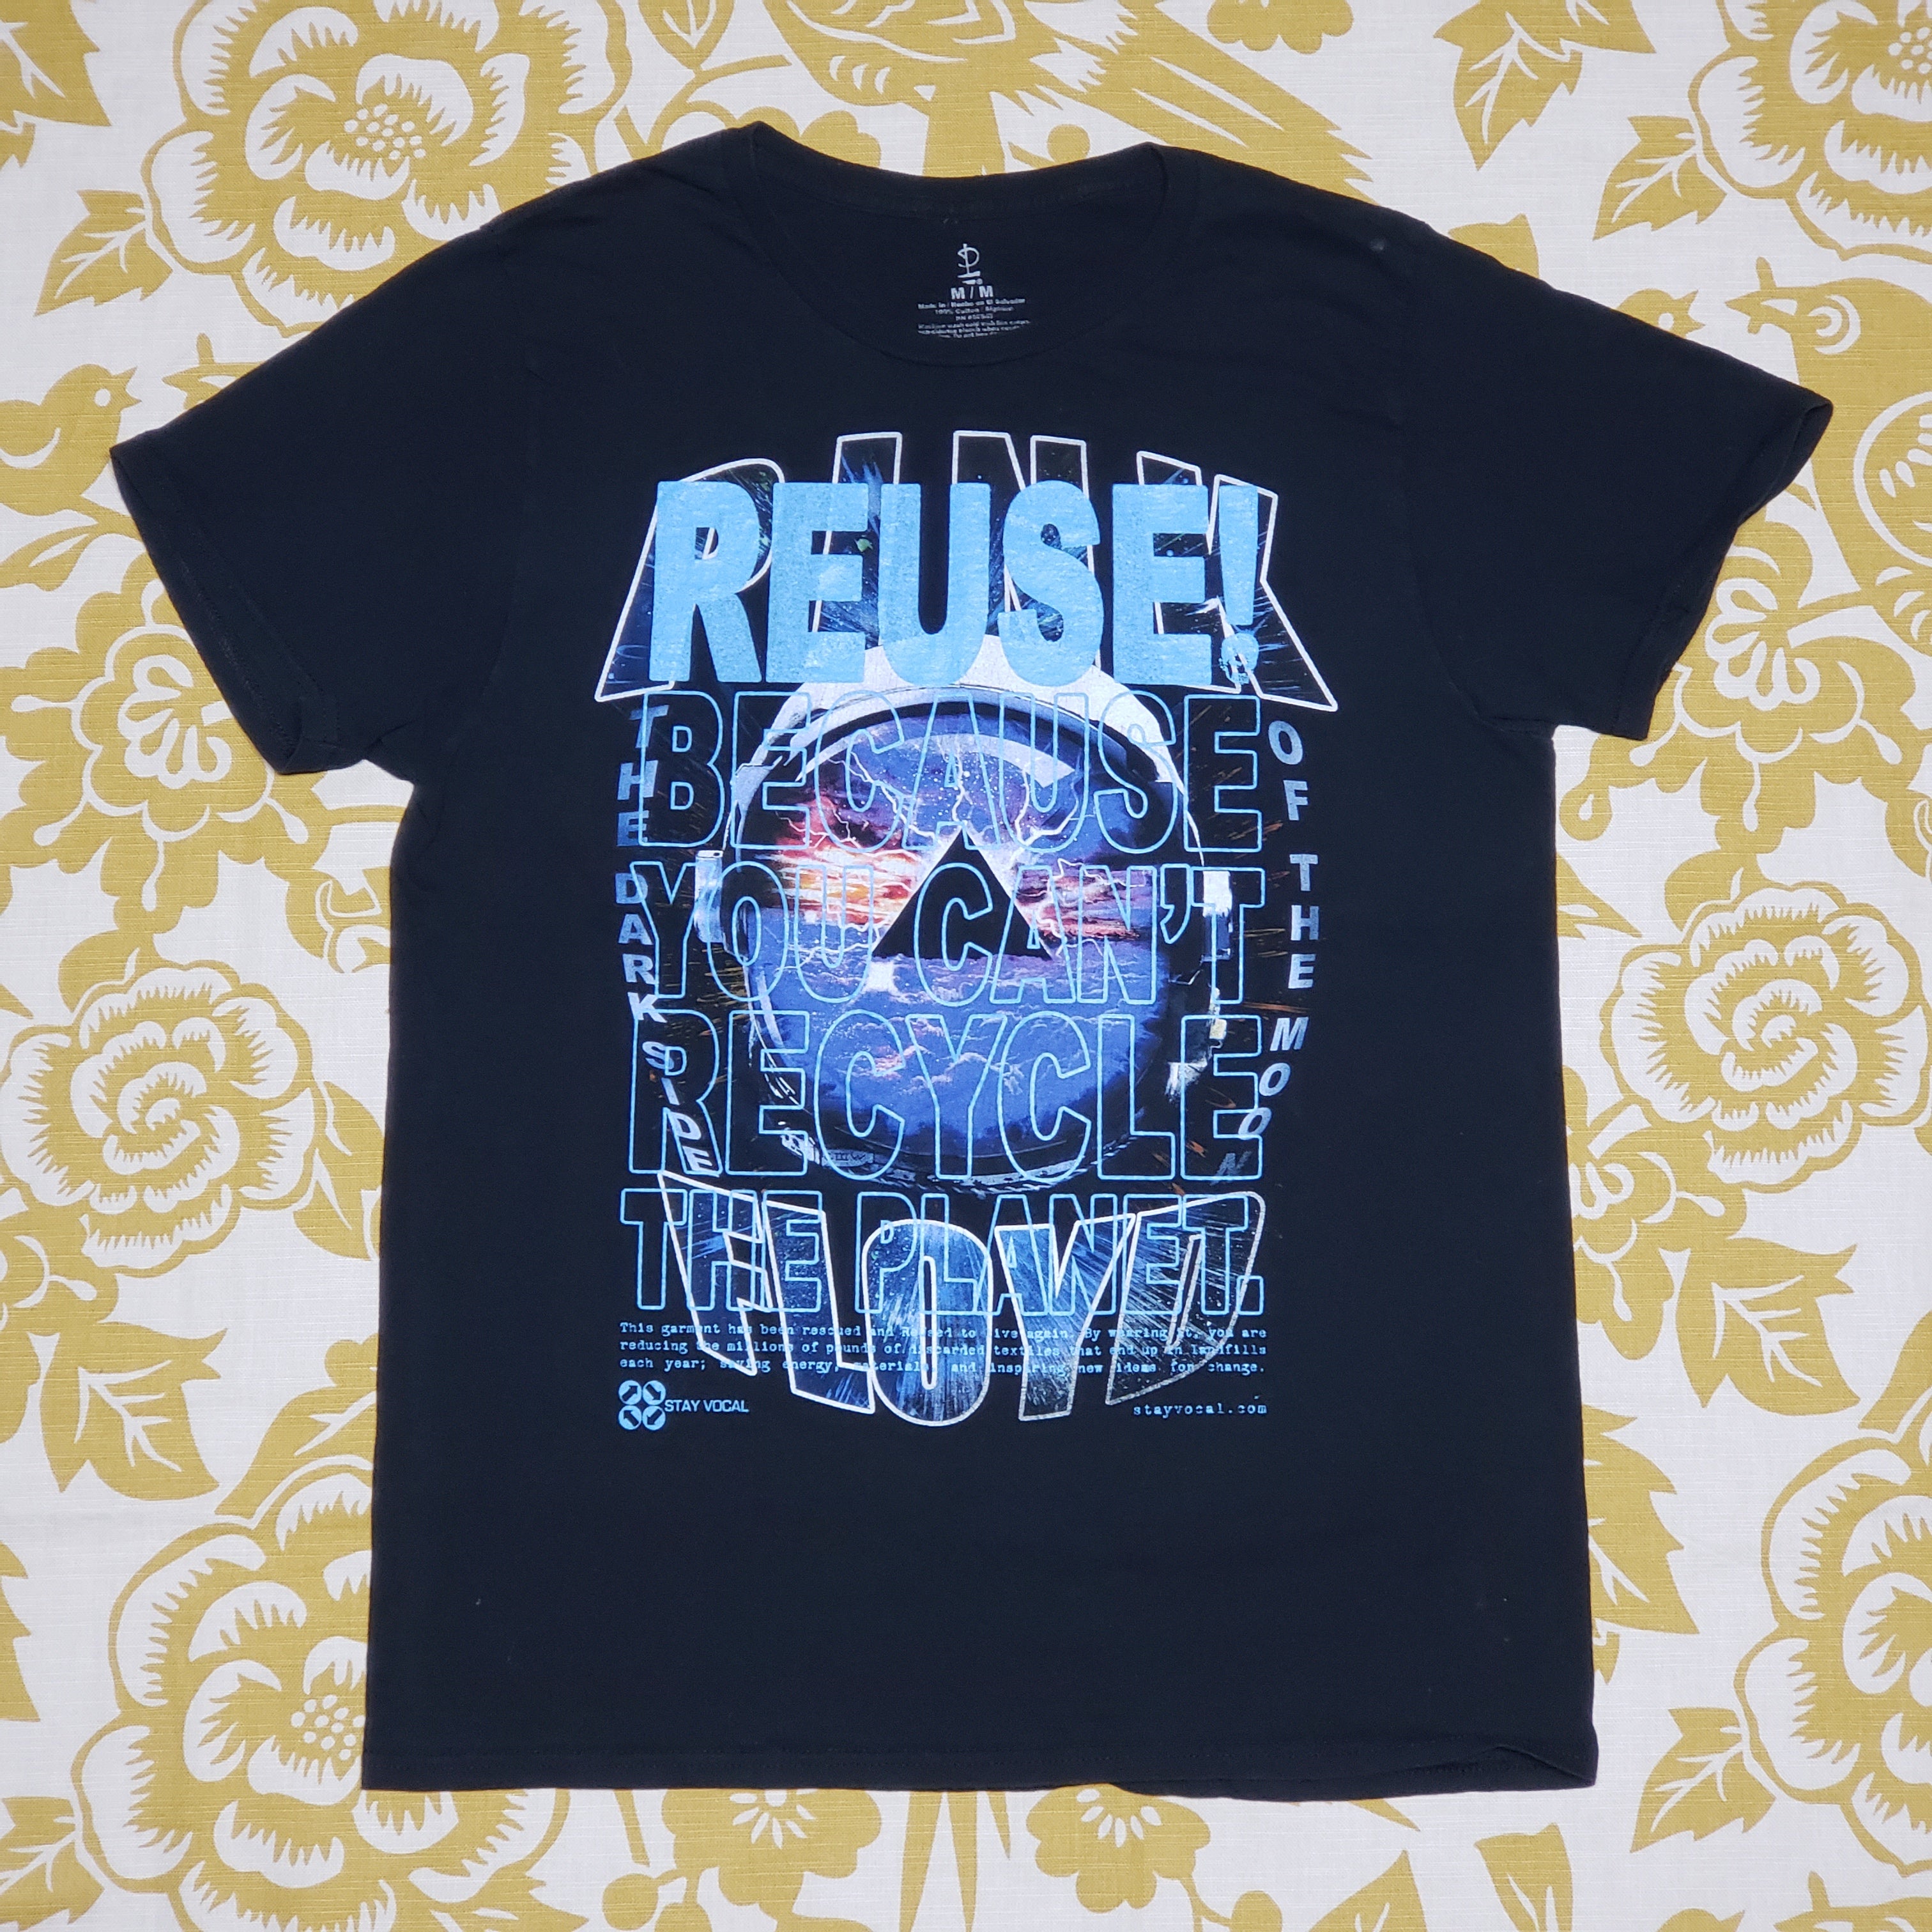 One of a Kind (Men's M) REUSE! Pink Floyd Dark Side of the Moon T-Shirt